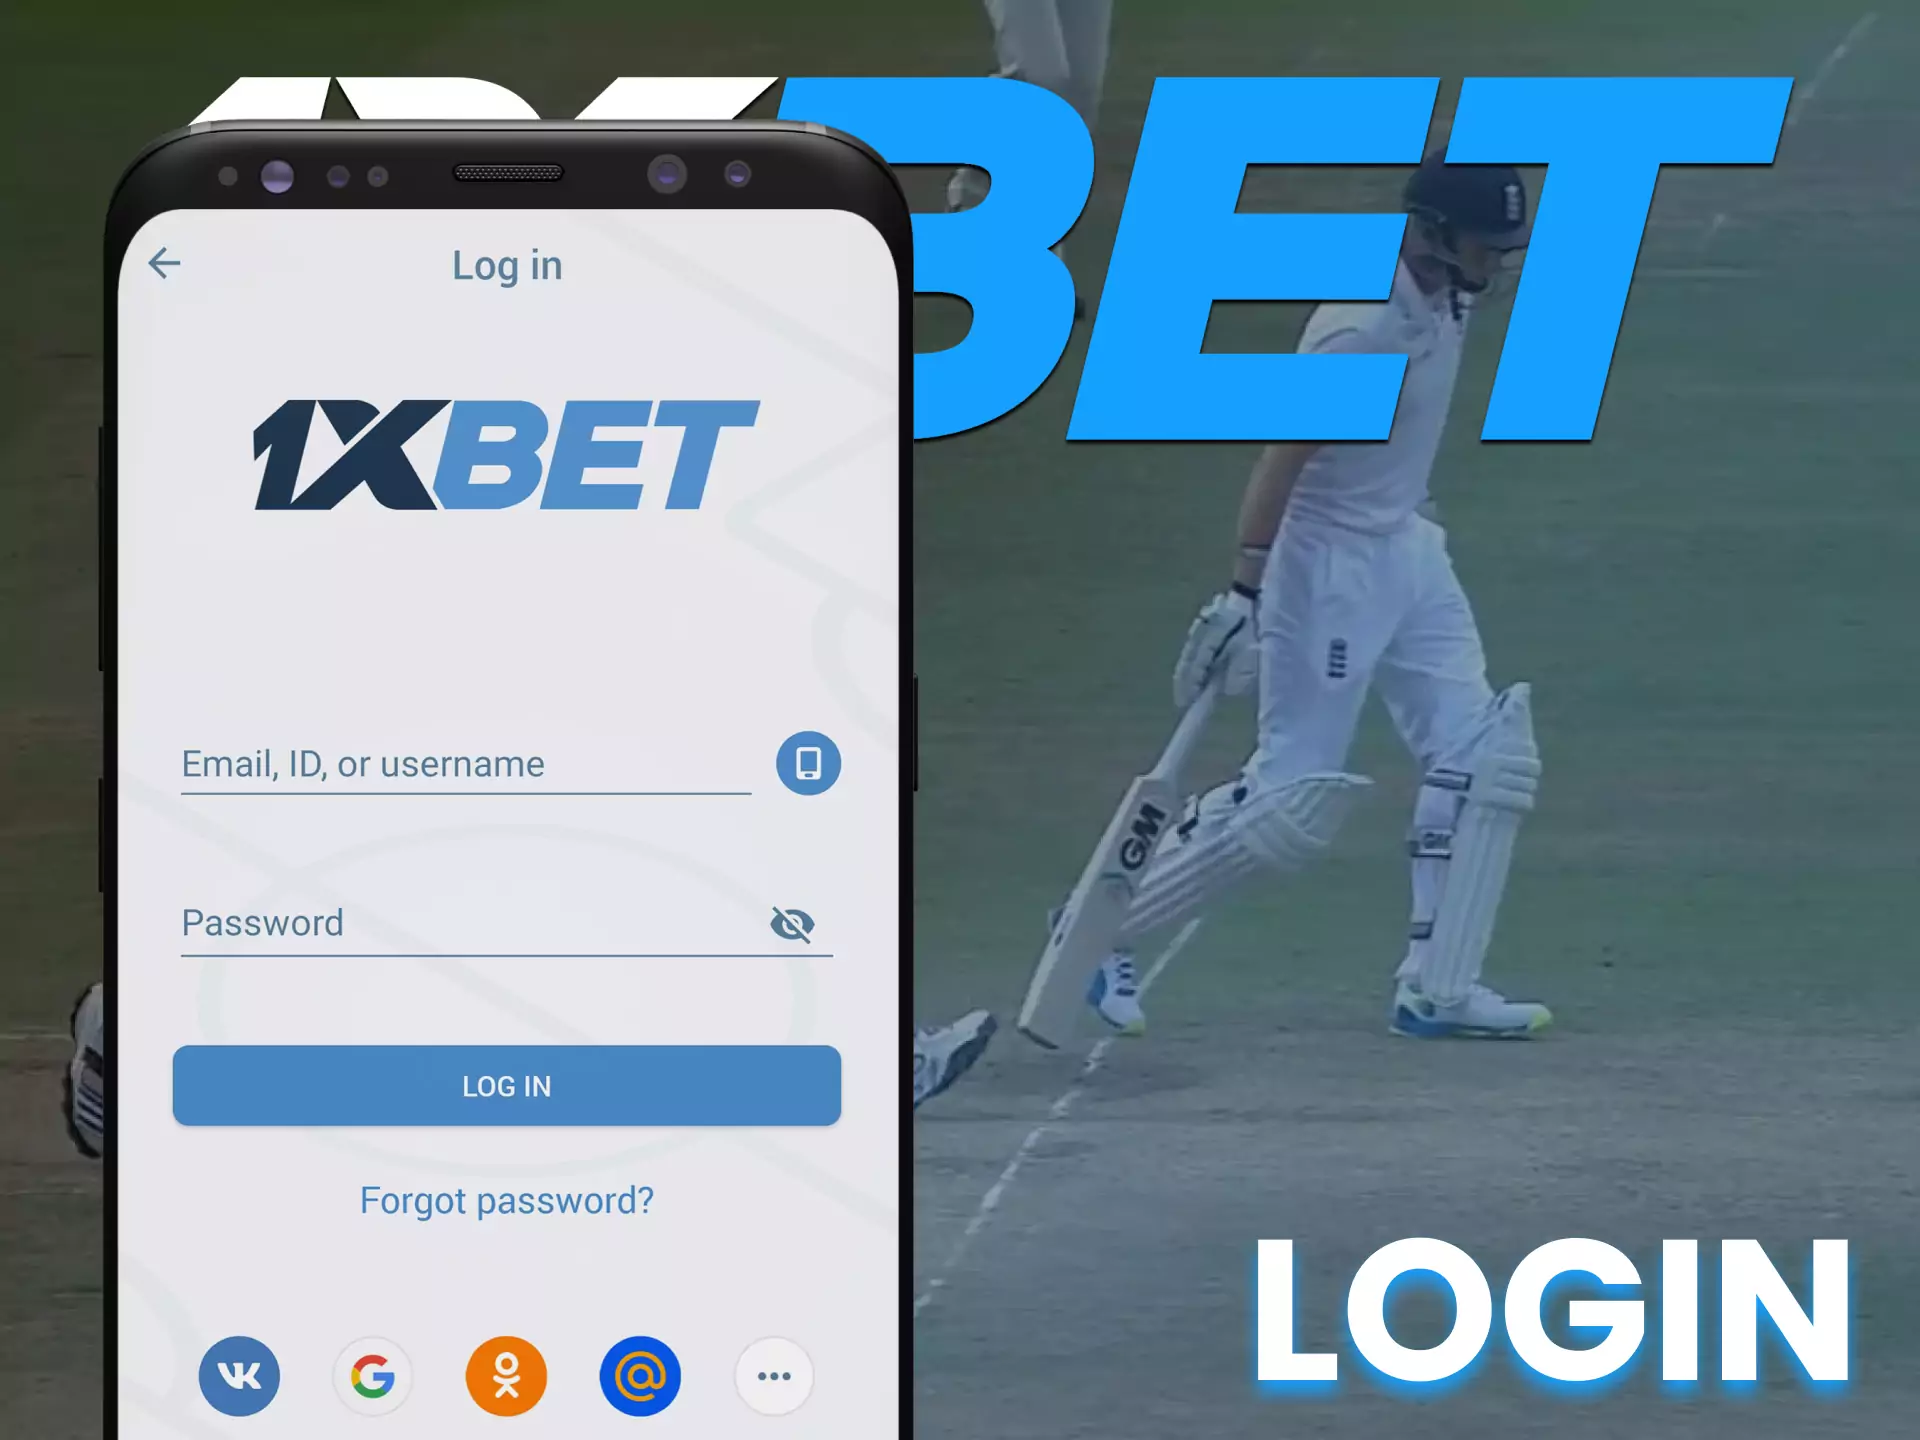 Go through a simple login on 1xBet to use all the features.